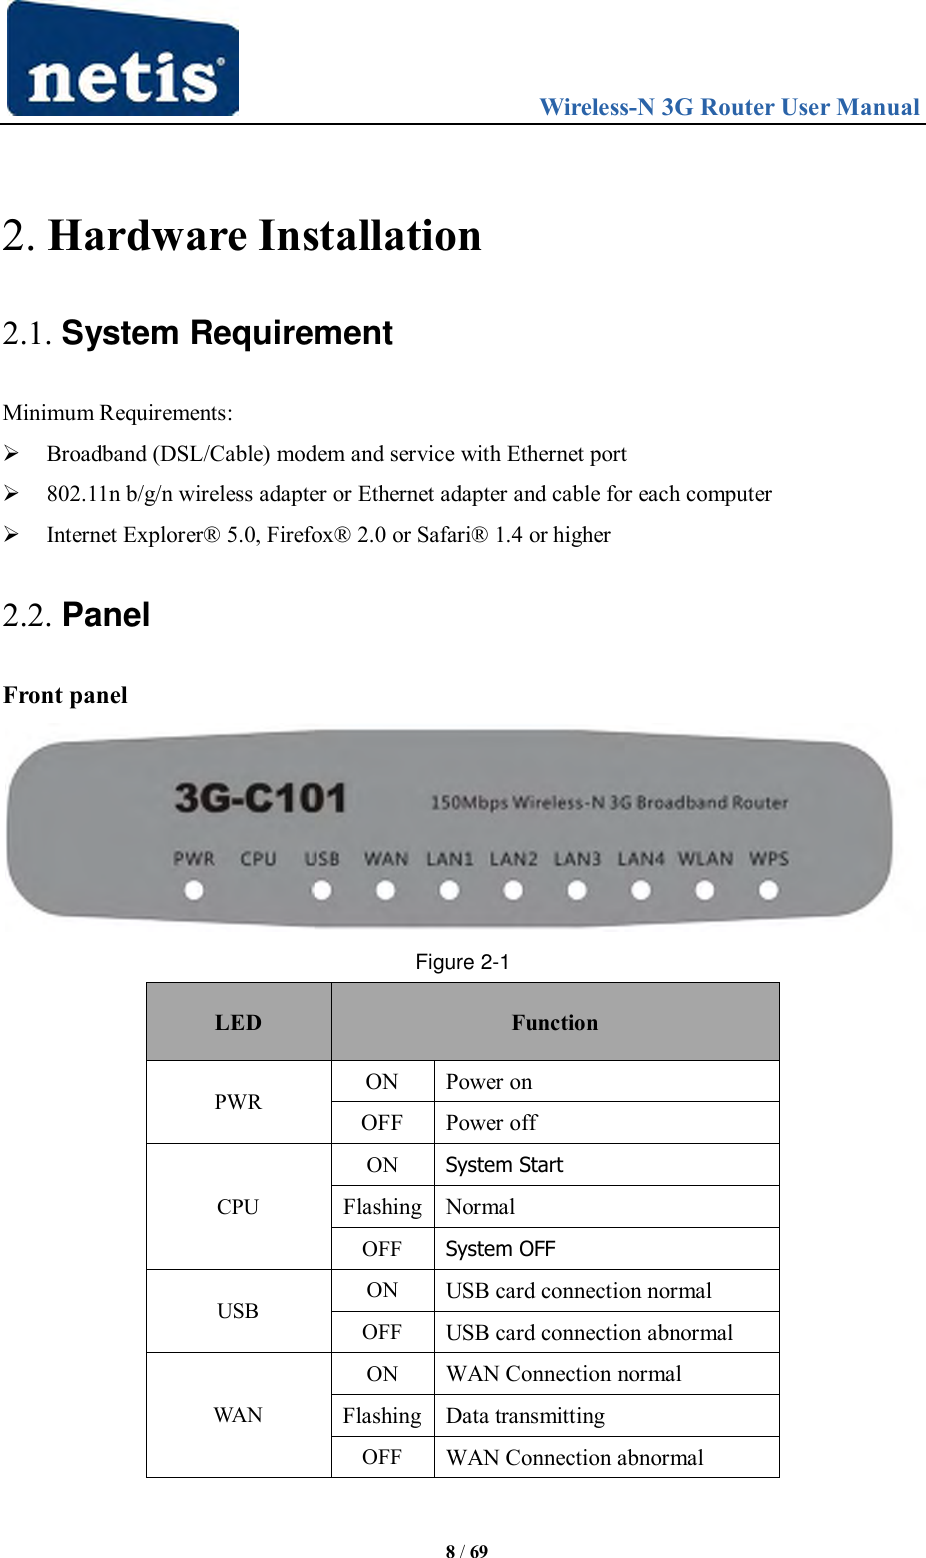                                 Wireless-N 3G Router User Manual  8 / 69  2. Hardware Installation 2.1. System Requirement Minimum Requirements:  Broadband (DSL/Cable) modem and service with Ethernet port  802.11n b/g/n wireless adapter or Ethernet adapter and cable for each computer  Internet Explorer® 5.0, Firefox® 2.0 or Safari® 1.4 or higher 2.2. Panel Front panel  Figure 2-1 LED   Function   PWR ON   Power on   OFF   Power off   CPU ON System Start Flashing   Normal OFF System OFF USB ON USB card connection normal OFF USB card connection abnormal   WAN ON WAN Connection normal   Flashing Data transmitting   OFF WAN Connection abnormal   